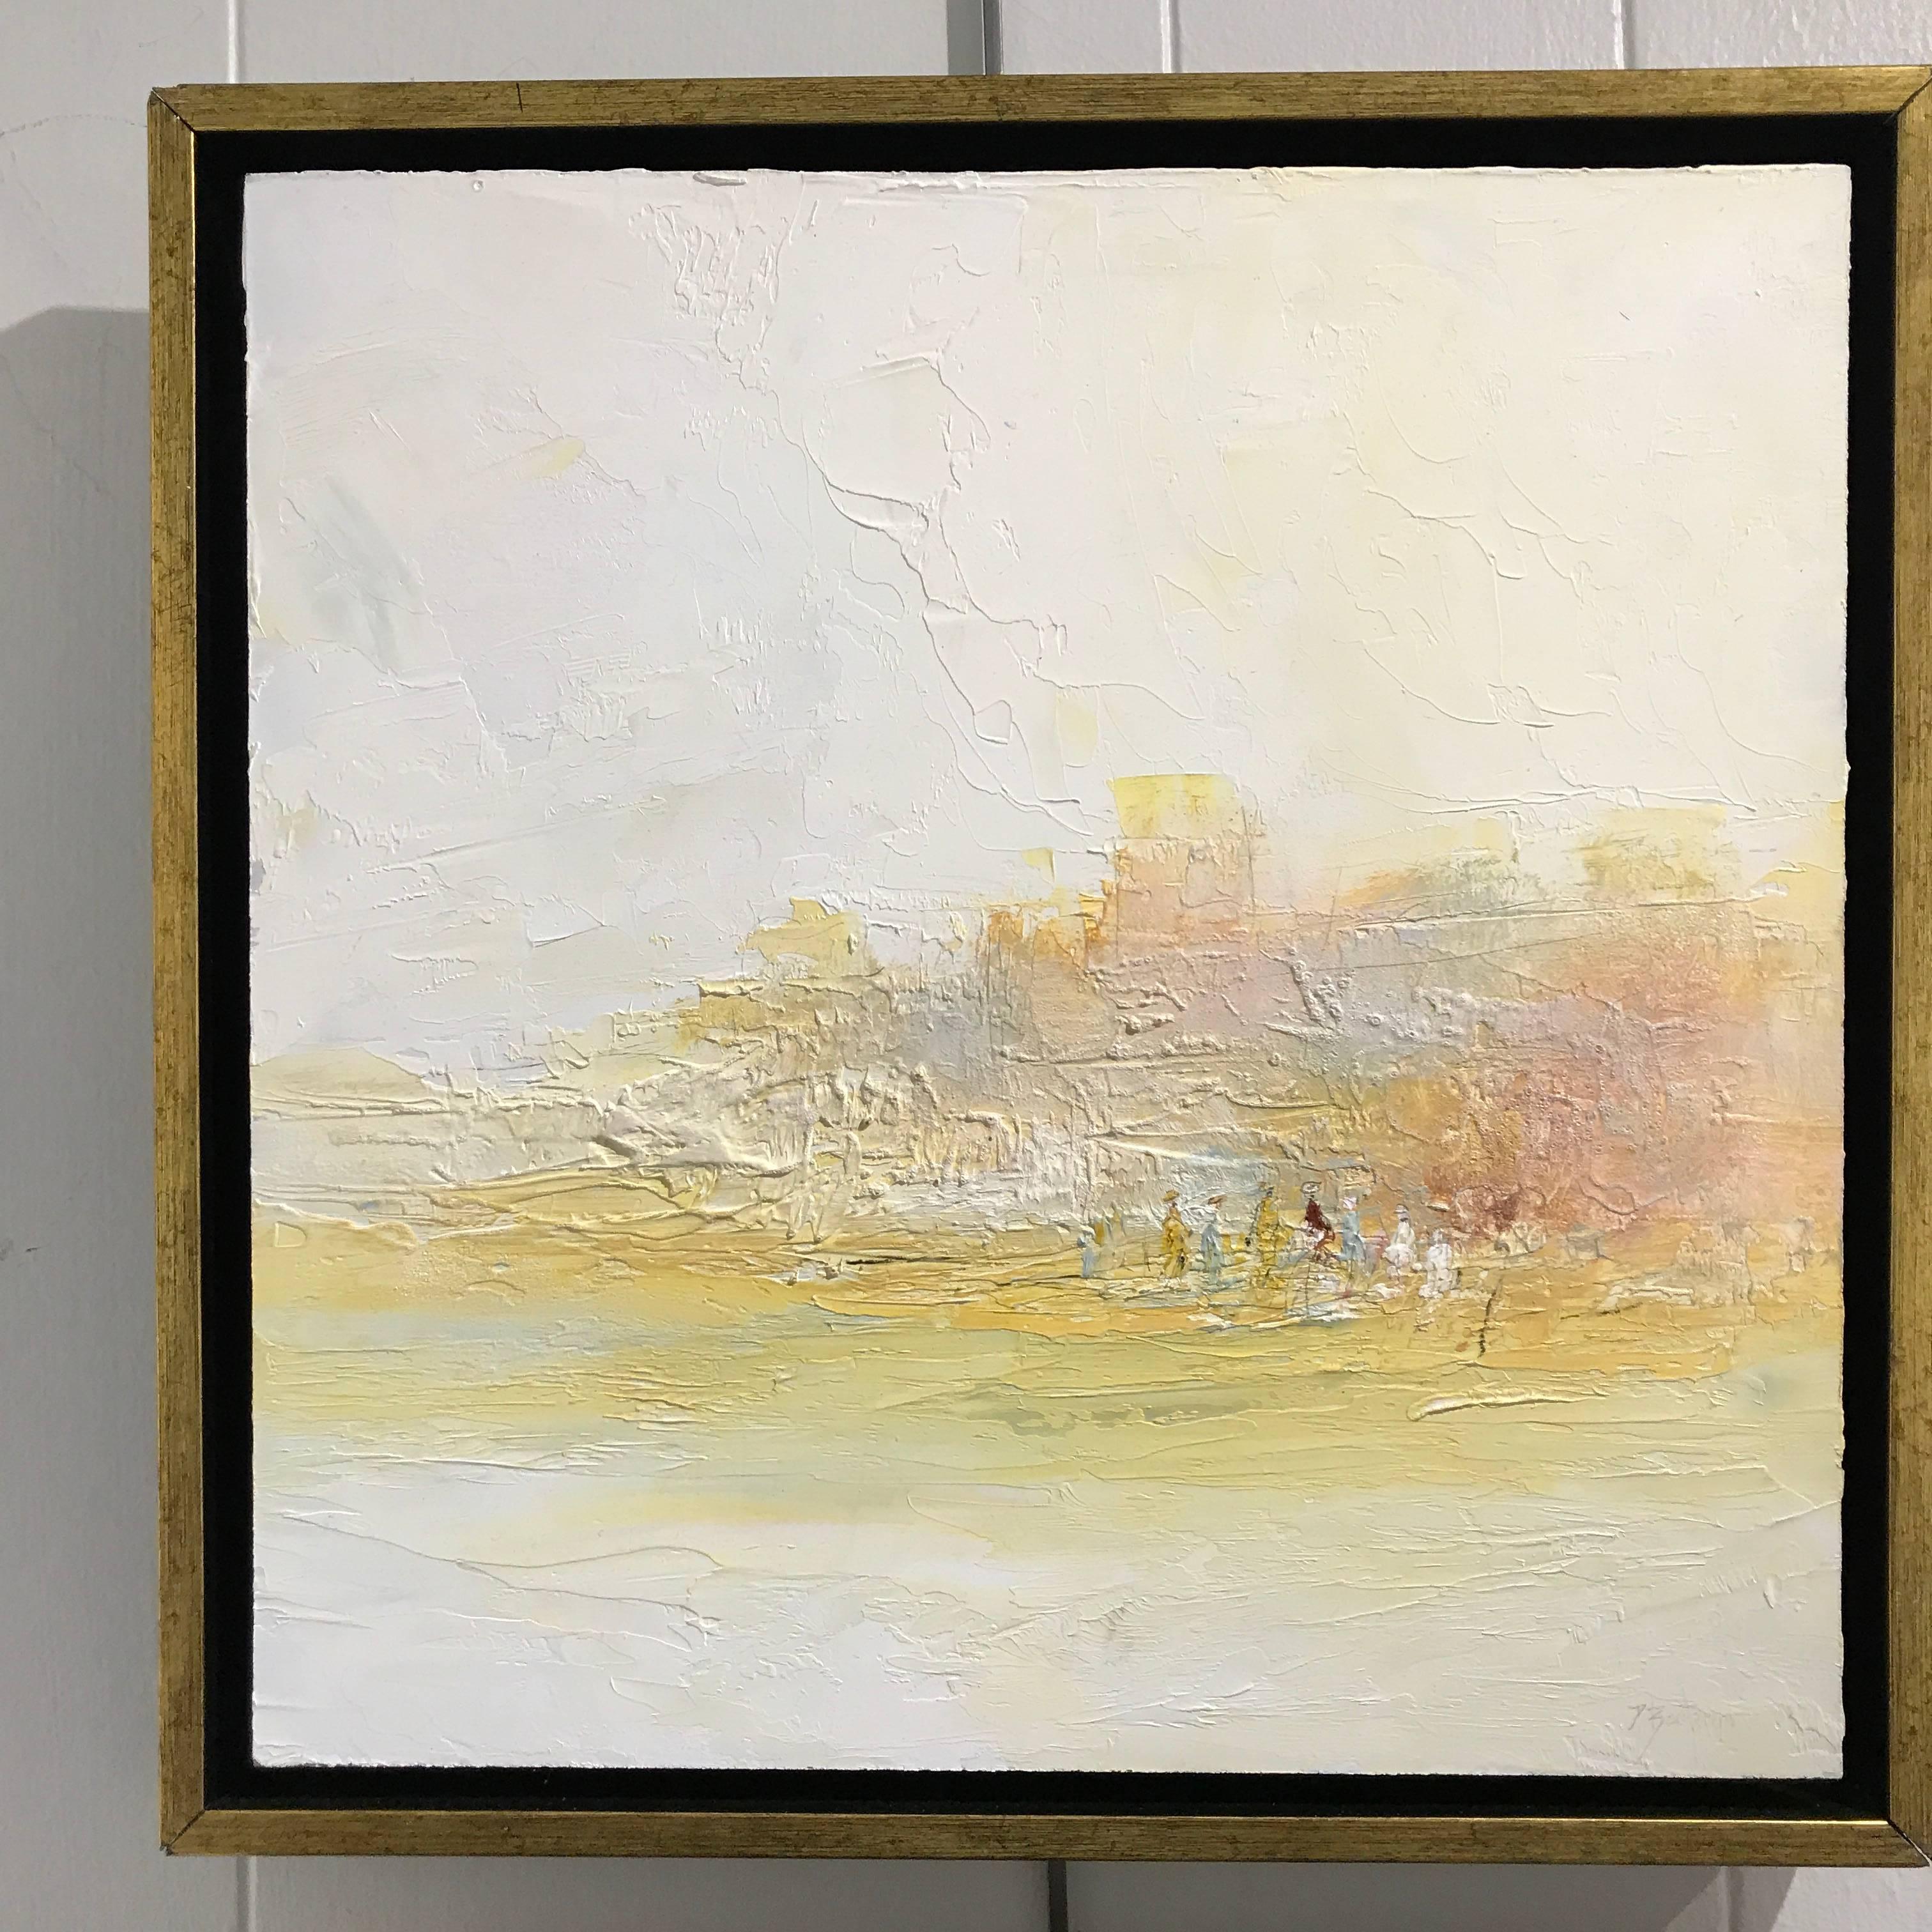 This oil on board painting titled Elégance, is by French artist Pascal Bouterin. It depicts in its abstract impressionist manner a romantic pastoral scene. Elegant characters are placed to the right side of the scene, in front of what seems to be